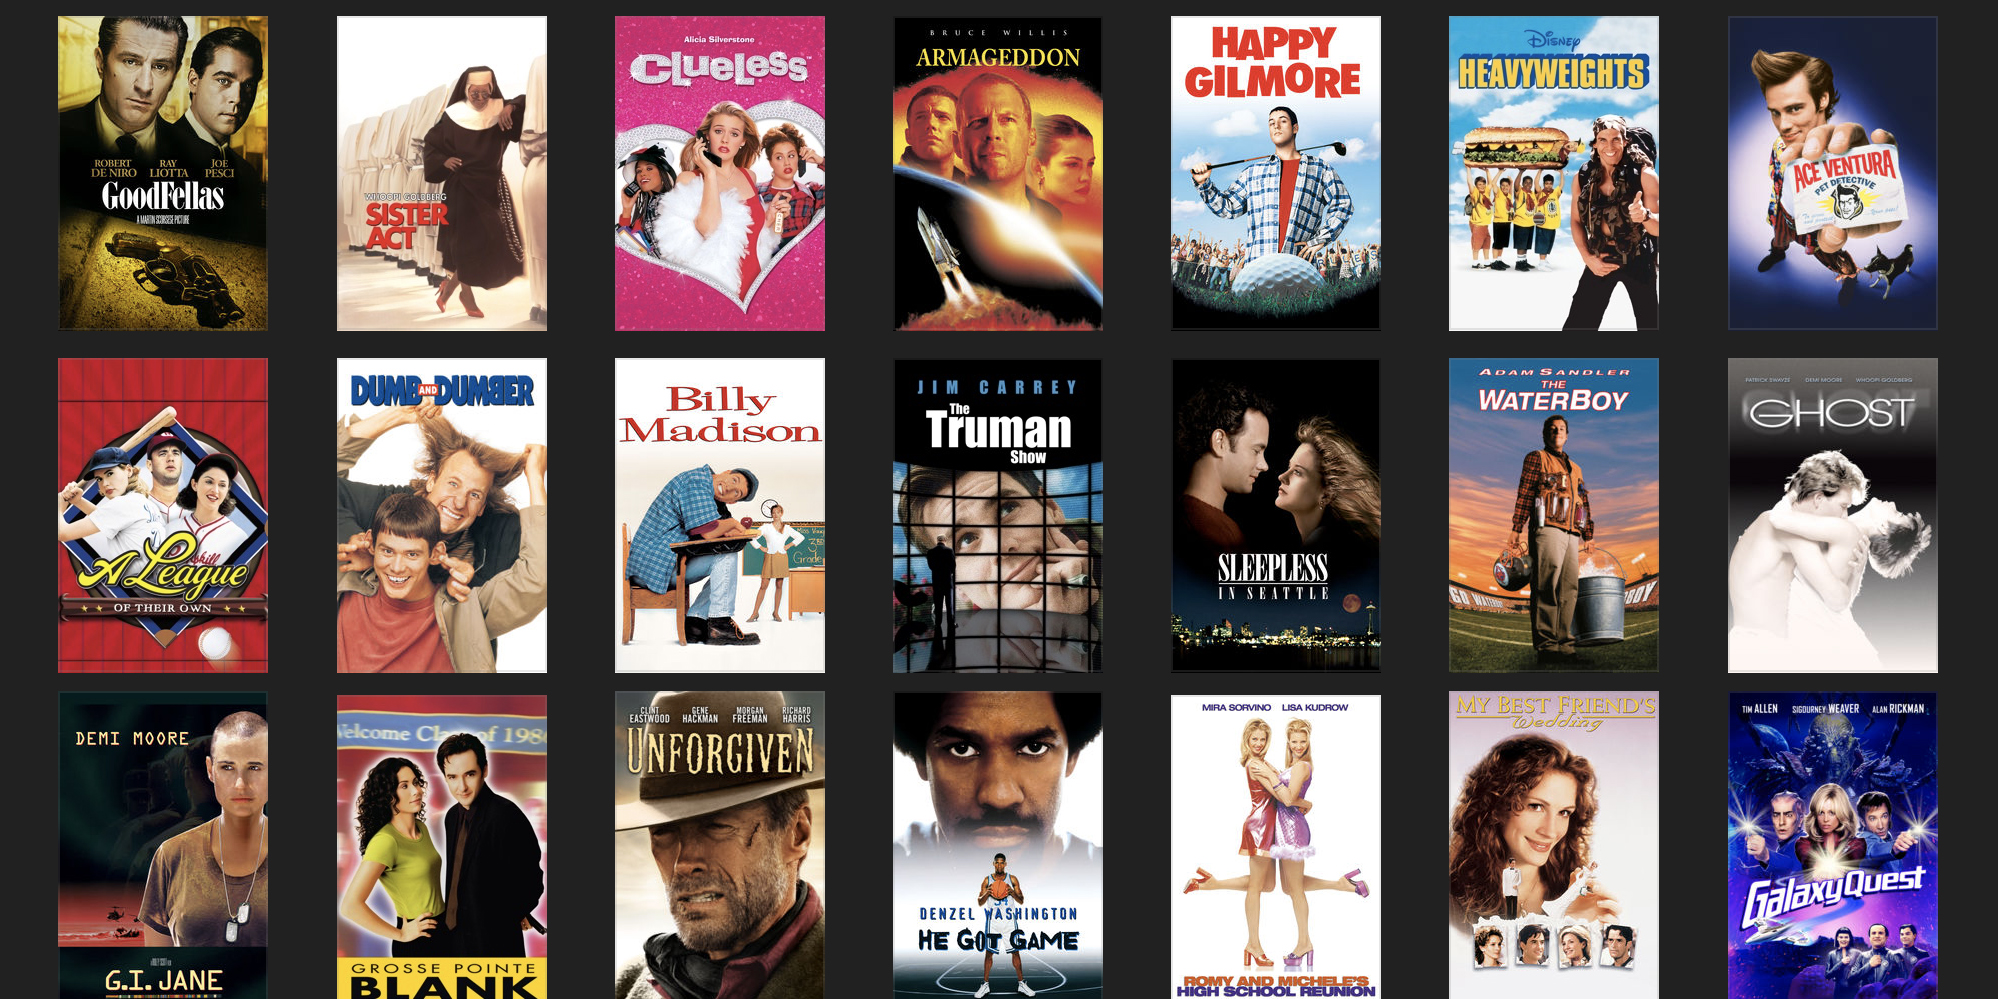 Apple's latest movie sale includes animated films from $8, more ...